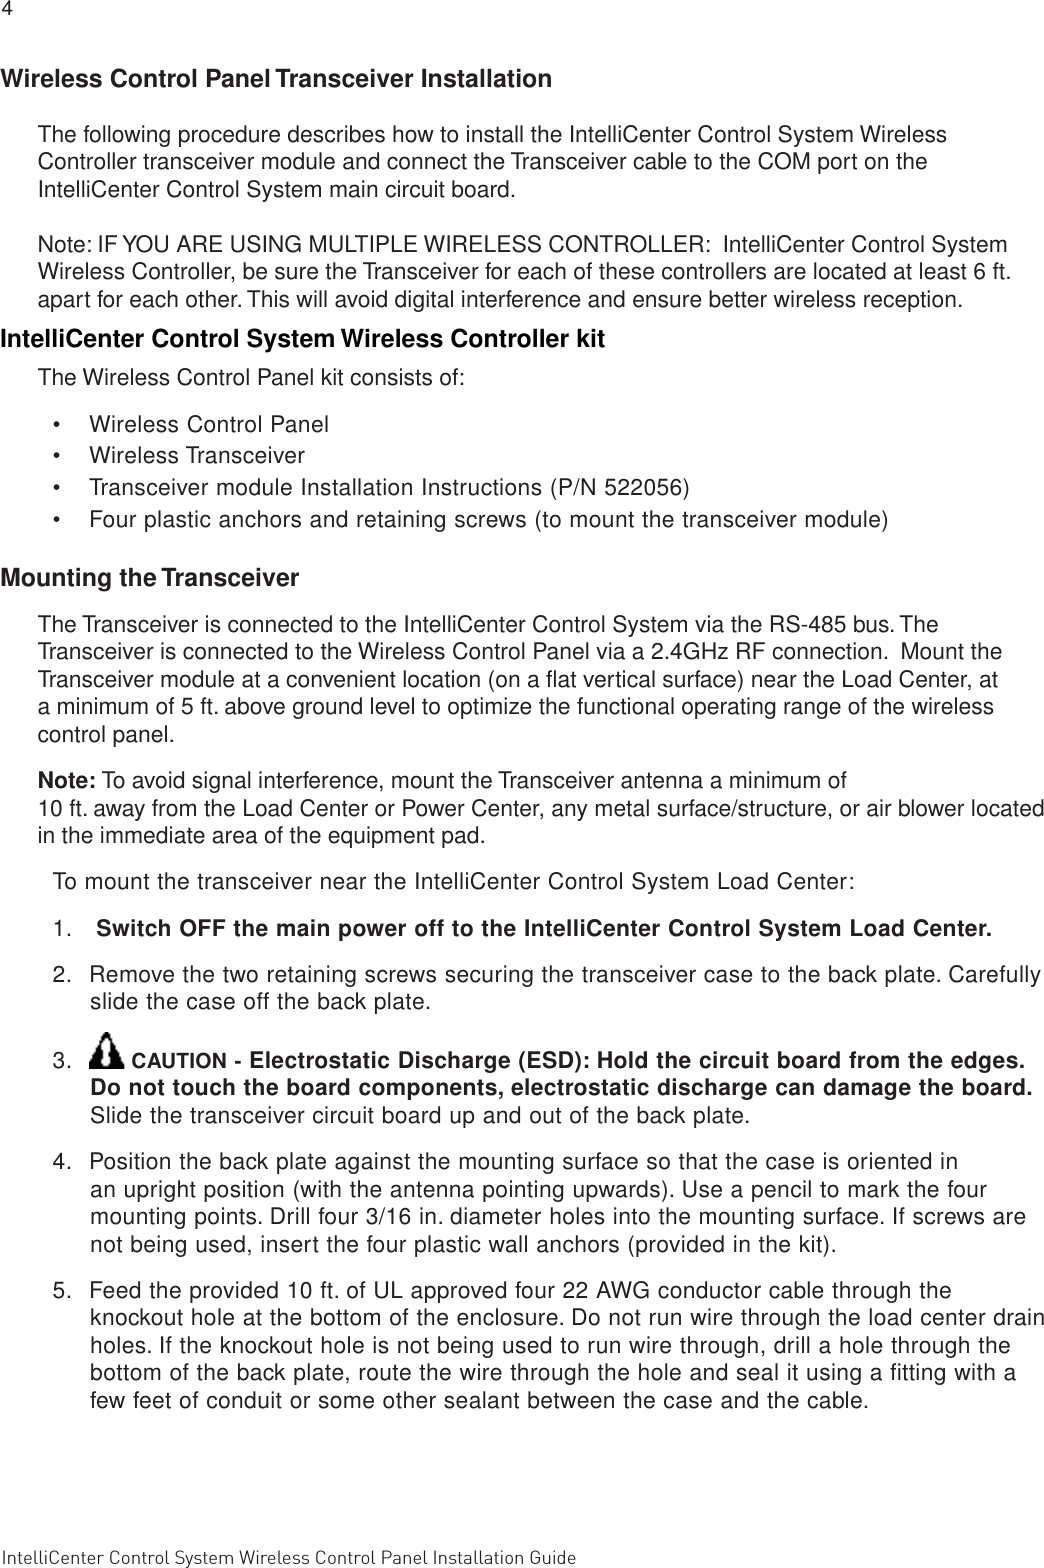 4 IntelliCenter Control System Wireless Control Panel Installation Guide                                                                                                                      IntellliCenter Control System Wireless Control Panel Installation Guide Wireless Control Panel Transceiver InstallationThe following procedure describes how to install the IntelliCenter Control System Wireless Controller transceiver module and connect the Transceiver cable to the COM port on the IntelliCenter Control System main circuit board.  Note: IF YOU ARE USING MULTIPLE WIRELESS CONTROLLER:  IntelliCenter Control System Wireless Controller, be sure the Transceiver for each of these controllers are located at least 6 ft. apart for each other. This will avoid digital interference and ensure better wireless reception.IntelliCenter Control System Wireless Controller kitThe Wireless Control Panel kit consists of:•  Wireless Control Panel•  Wireless Transceiver•  Transceiver module Installation Instructions (P/N 522056) •  Four plastic anchors and retaining screws (to mount the transceiver module)Mounting the TransceiverThe Transceiver is connected to the IntelliCenter Control System via the RS-485 bus. The Transceiver is connected to the Wireless Control Panel via a 2.4GHz RF connection.  Mount the Transceiver module at a convenient location (on a ﬂat vertical surface) near the Load Center, at a minimum of 5 ft. above ground level to optimize the functional operating range of the wireless control panel.Note: To avoid signal interference, mount the Transceiver antenna a minimum of 10 ft. away from the Load Center or Power Center, any metal surface/structure, or air blower located in the immediate area of the equipment pad.To mount the transceiver near the IntelliCenter Control System Load Center:1.   Switch OFF the main power off to the IntelliCenter Control System Load Center.2.  Remove the two retaining screws securing the transceiver case to the back plate. Carefully slide the case off the back plate. 3.   CAUTION - Electrostatic Discharge (ESD): Hold the circuit board from the edges. Do not touch the board components, electrostatic discharge can damage the board. Slide the transceiver circuit board up and out of the back plate.  4.  Position the back plate against the mounting surface so that the case is oriented in an upright position (with the antenna pointing upwards). Use a pencil to mark the four mounting points. Drill four 3/16 in. diameter holes into the mounting surface. If screws are not being used, insert the four plastic wall anchors (provided in the kit).5.  Feed the provided 10 ft. of UL approved four 22 AWG conductor cable through the knockout hole at the bottom of the enclosure. Do not run wire through the load center drain holes. If the knockout hole is not being used to run wire through, drill a hole through the bottom of the back plate, route the wire through the hole and seal it using a ﬁtting with a few feet of conduit or some other sealant between the case and the cable.